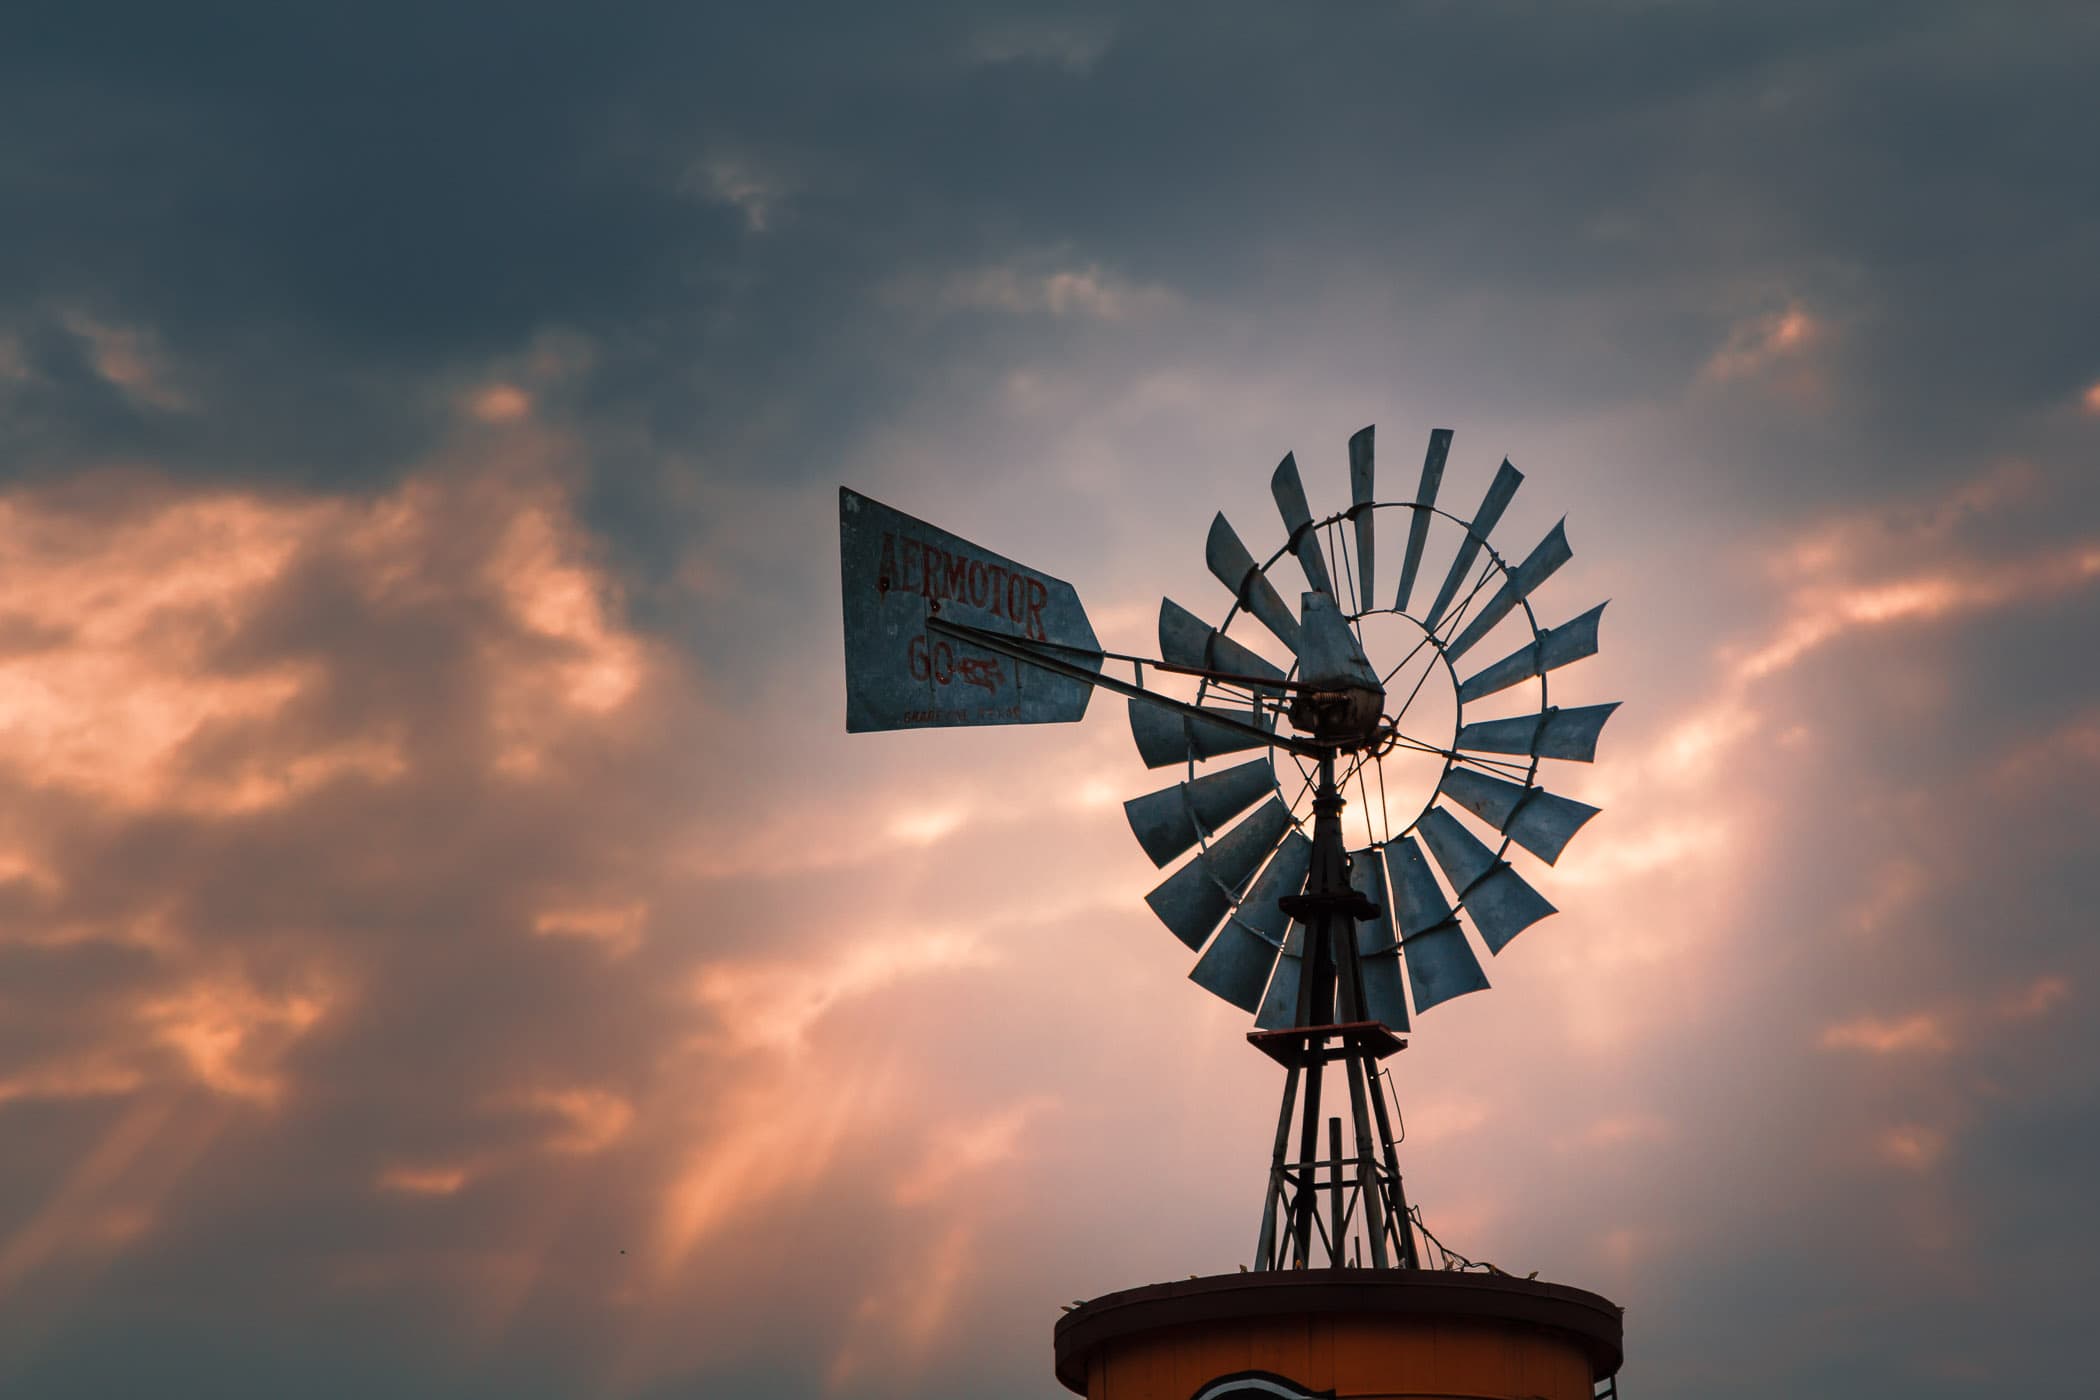 Sun rays pierce the clouds and illuminate a windmill in Downtown Grapevine, Texas.